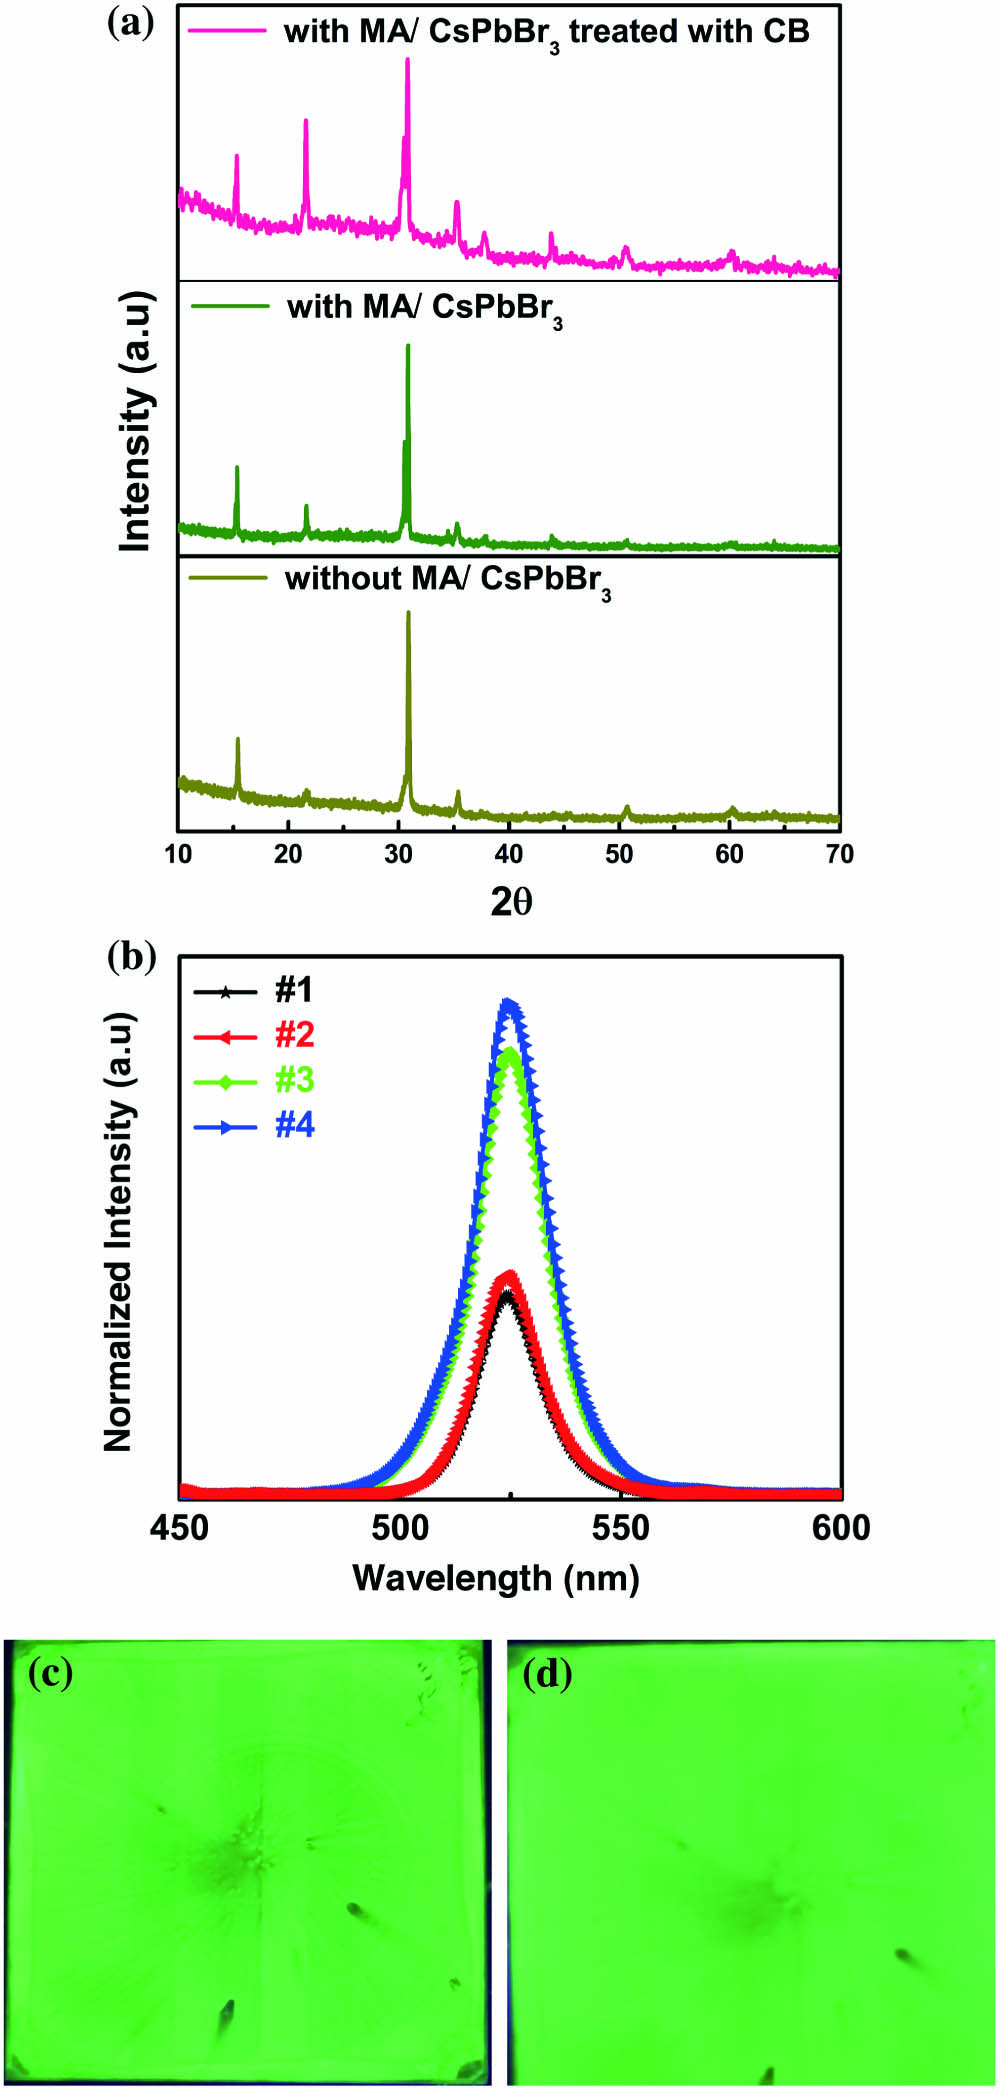 (a) X-ray diffraction (XRD) patterns without MA/CsPbBr3, with MA/CsPbBr3, and with MA/CsPbBr3 treated with anti-solvent CB. (b) Normalized PL, (c) PL image only with MA-treated perovskite film, and (d) PL image of perovskite film treated with CB and MA.